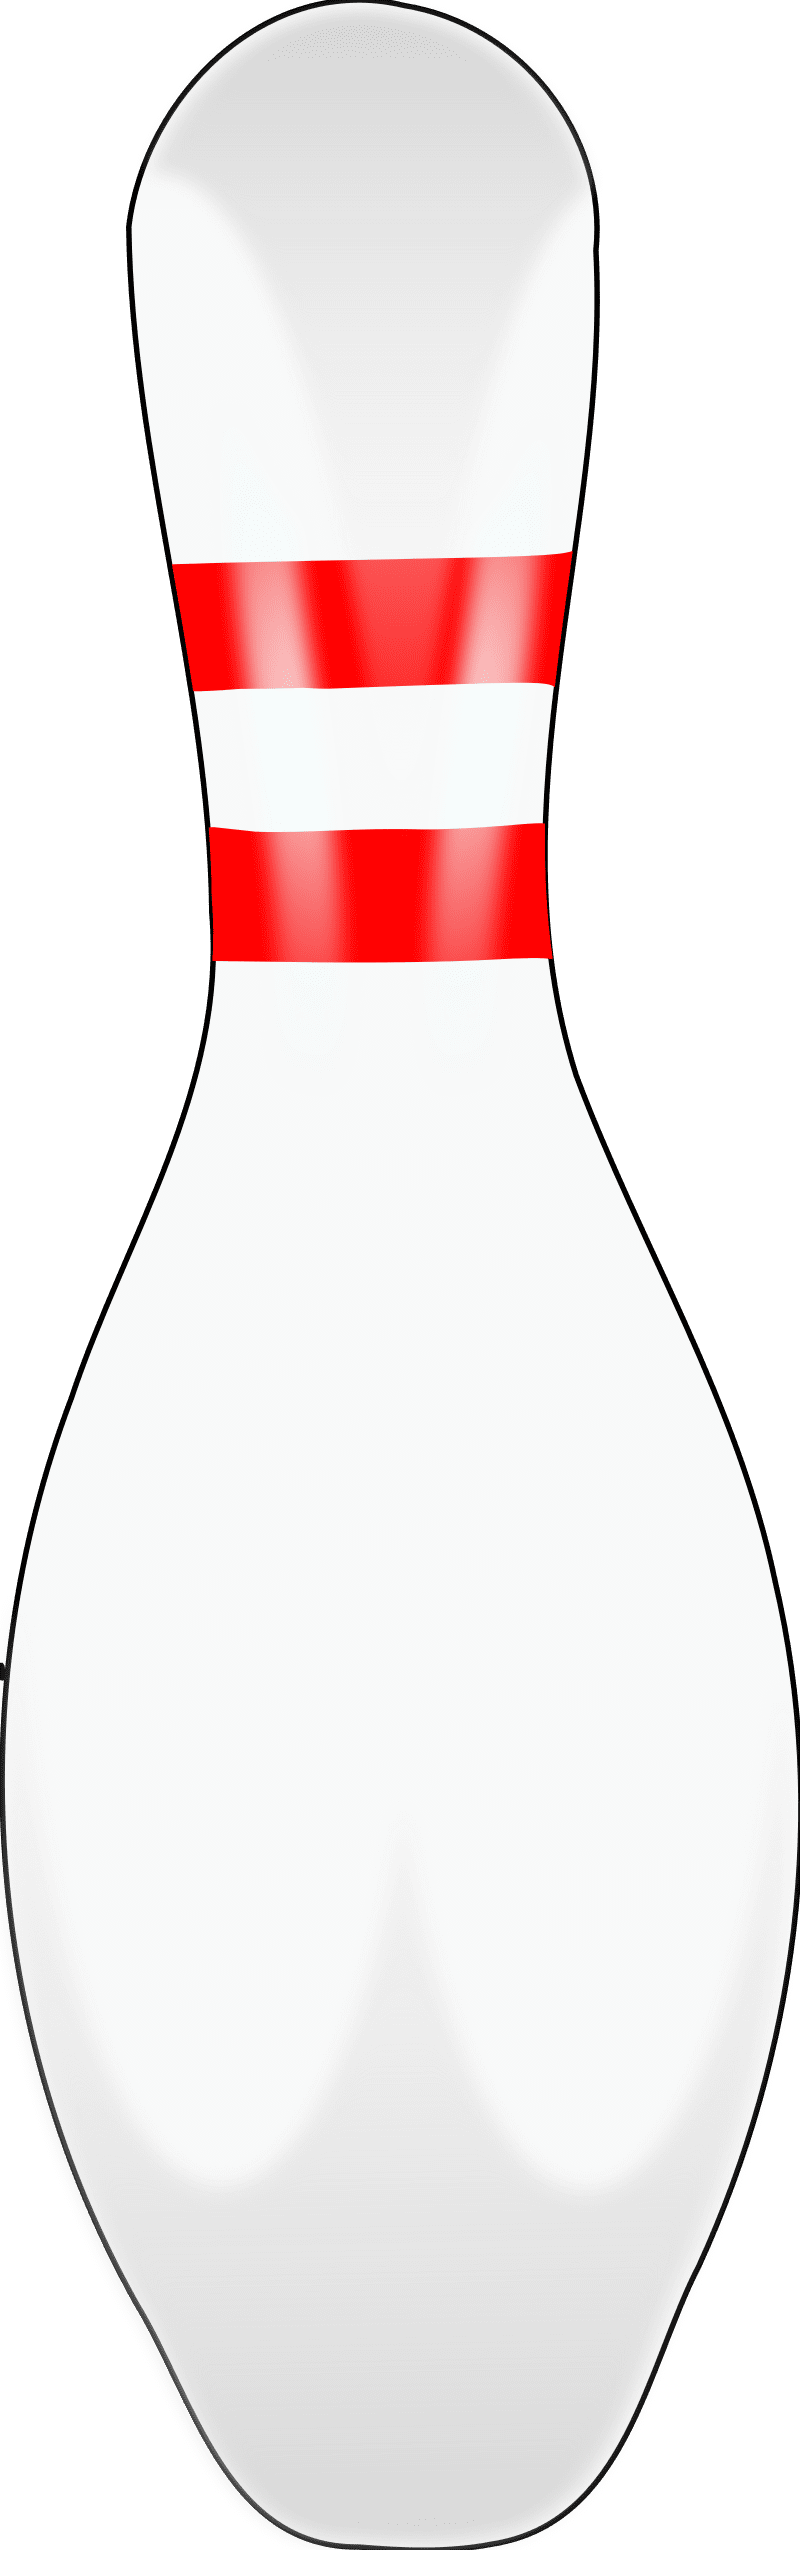 Bowling pin commons clipart logo 2